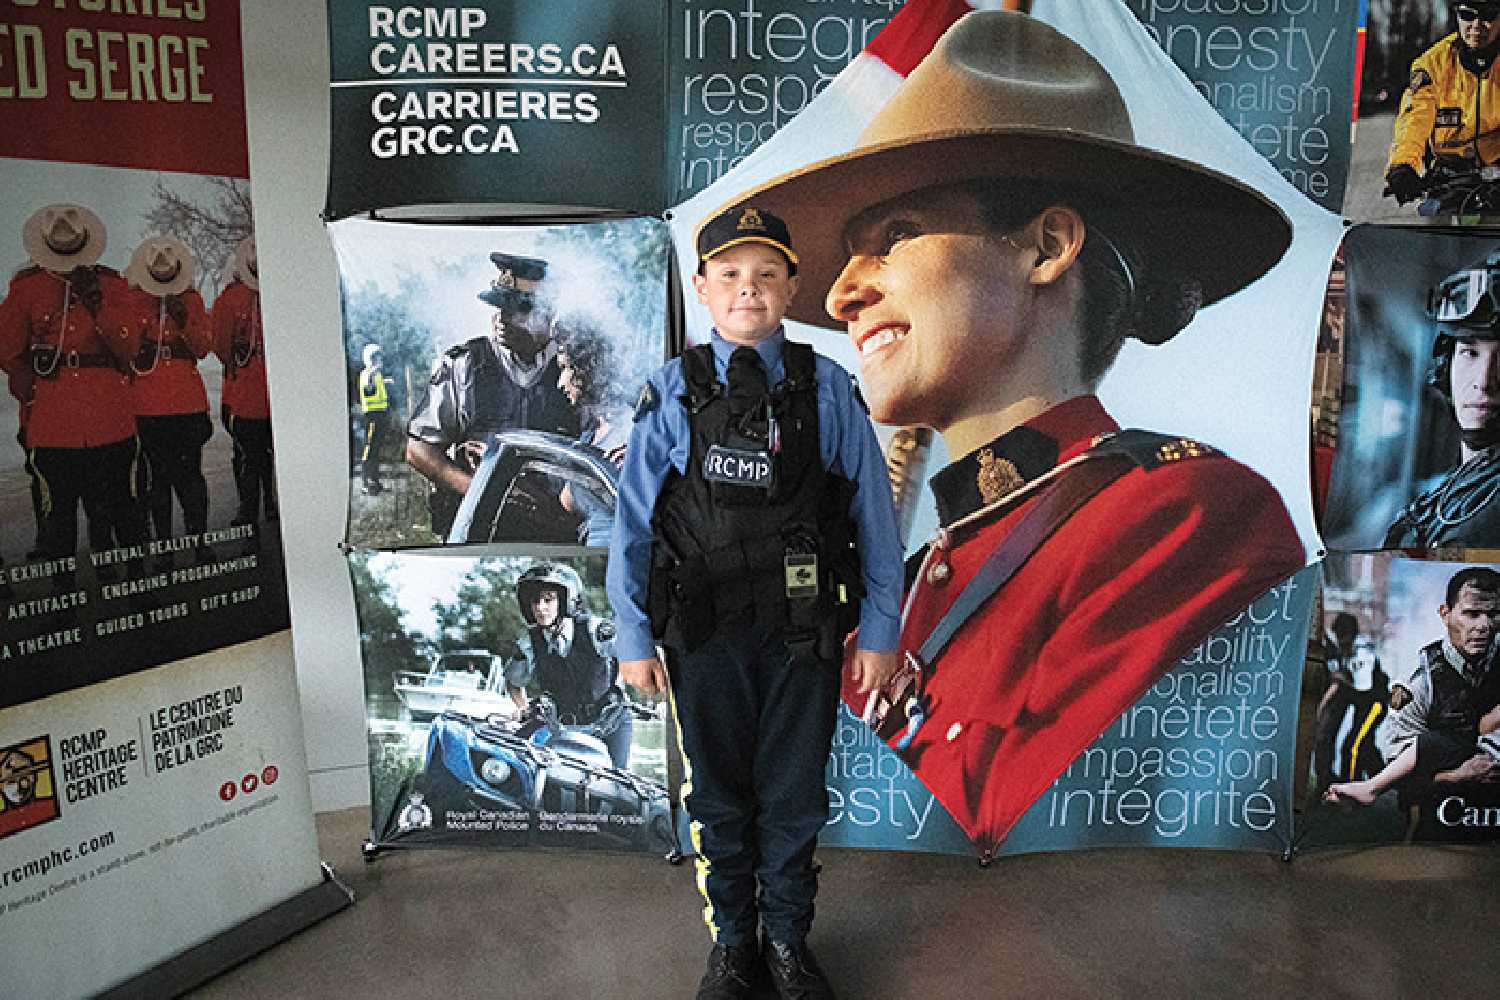 I want to be an RCMP officer one day. I think it would be really cool to be able to help people and protect people in your community, said Kohl.